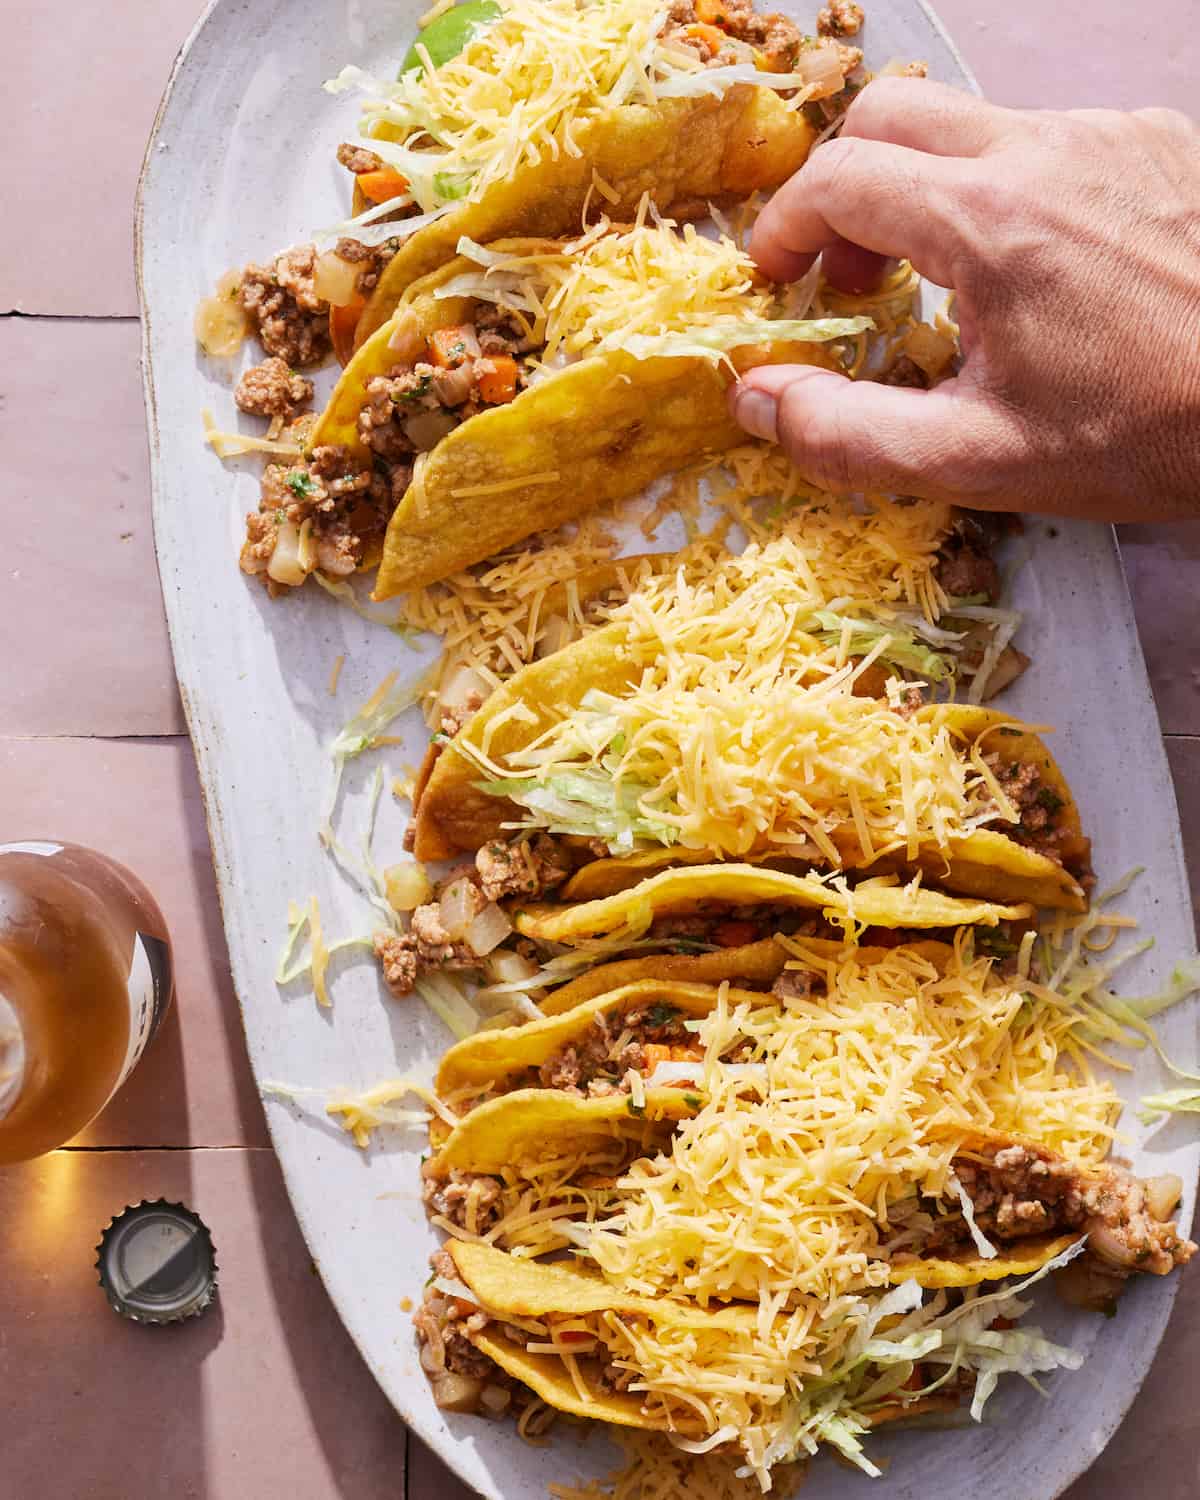 An oval white platter with picadillo hard shell tacos topped with shredded cheese, placed on a tiled surface, with an open beverage in a bottle on the side, with a hand picking up a taco from the platter.